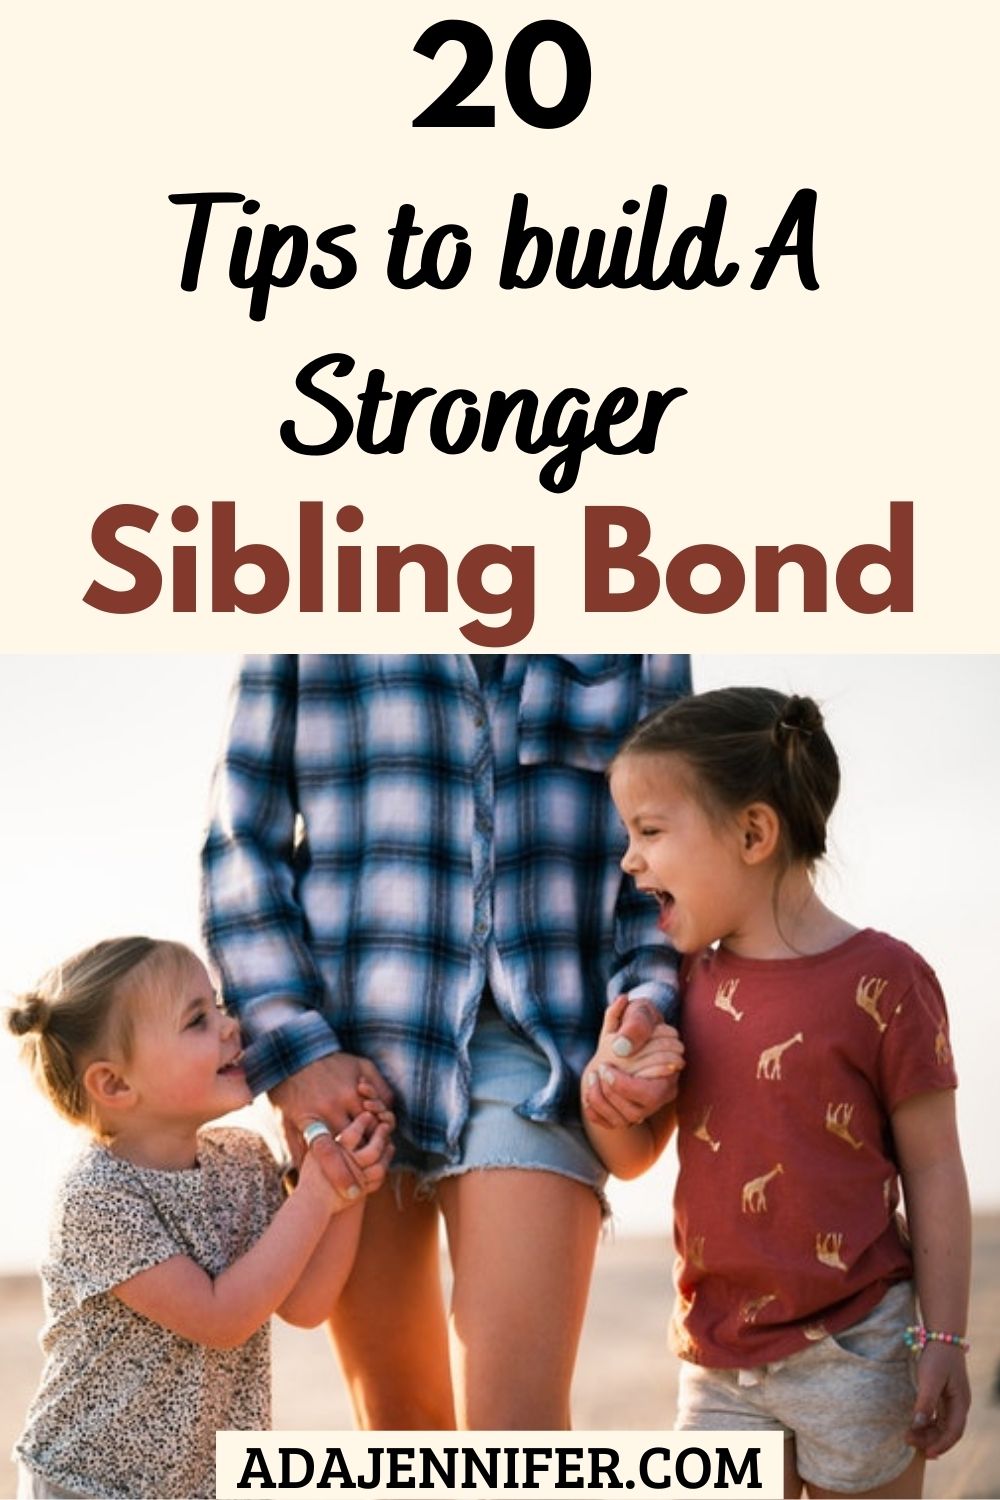 Sibling bond meaning